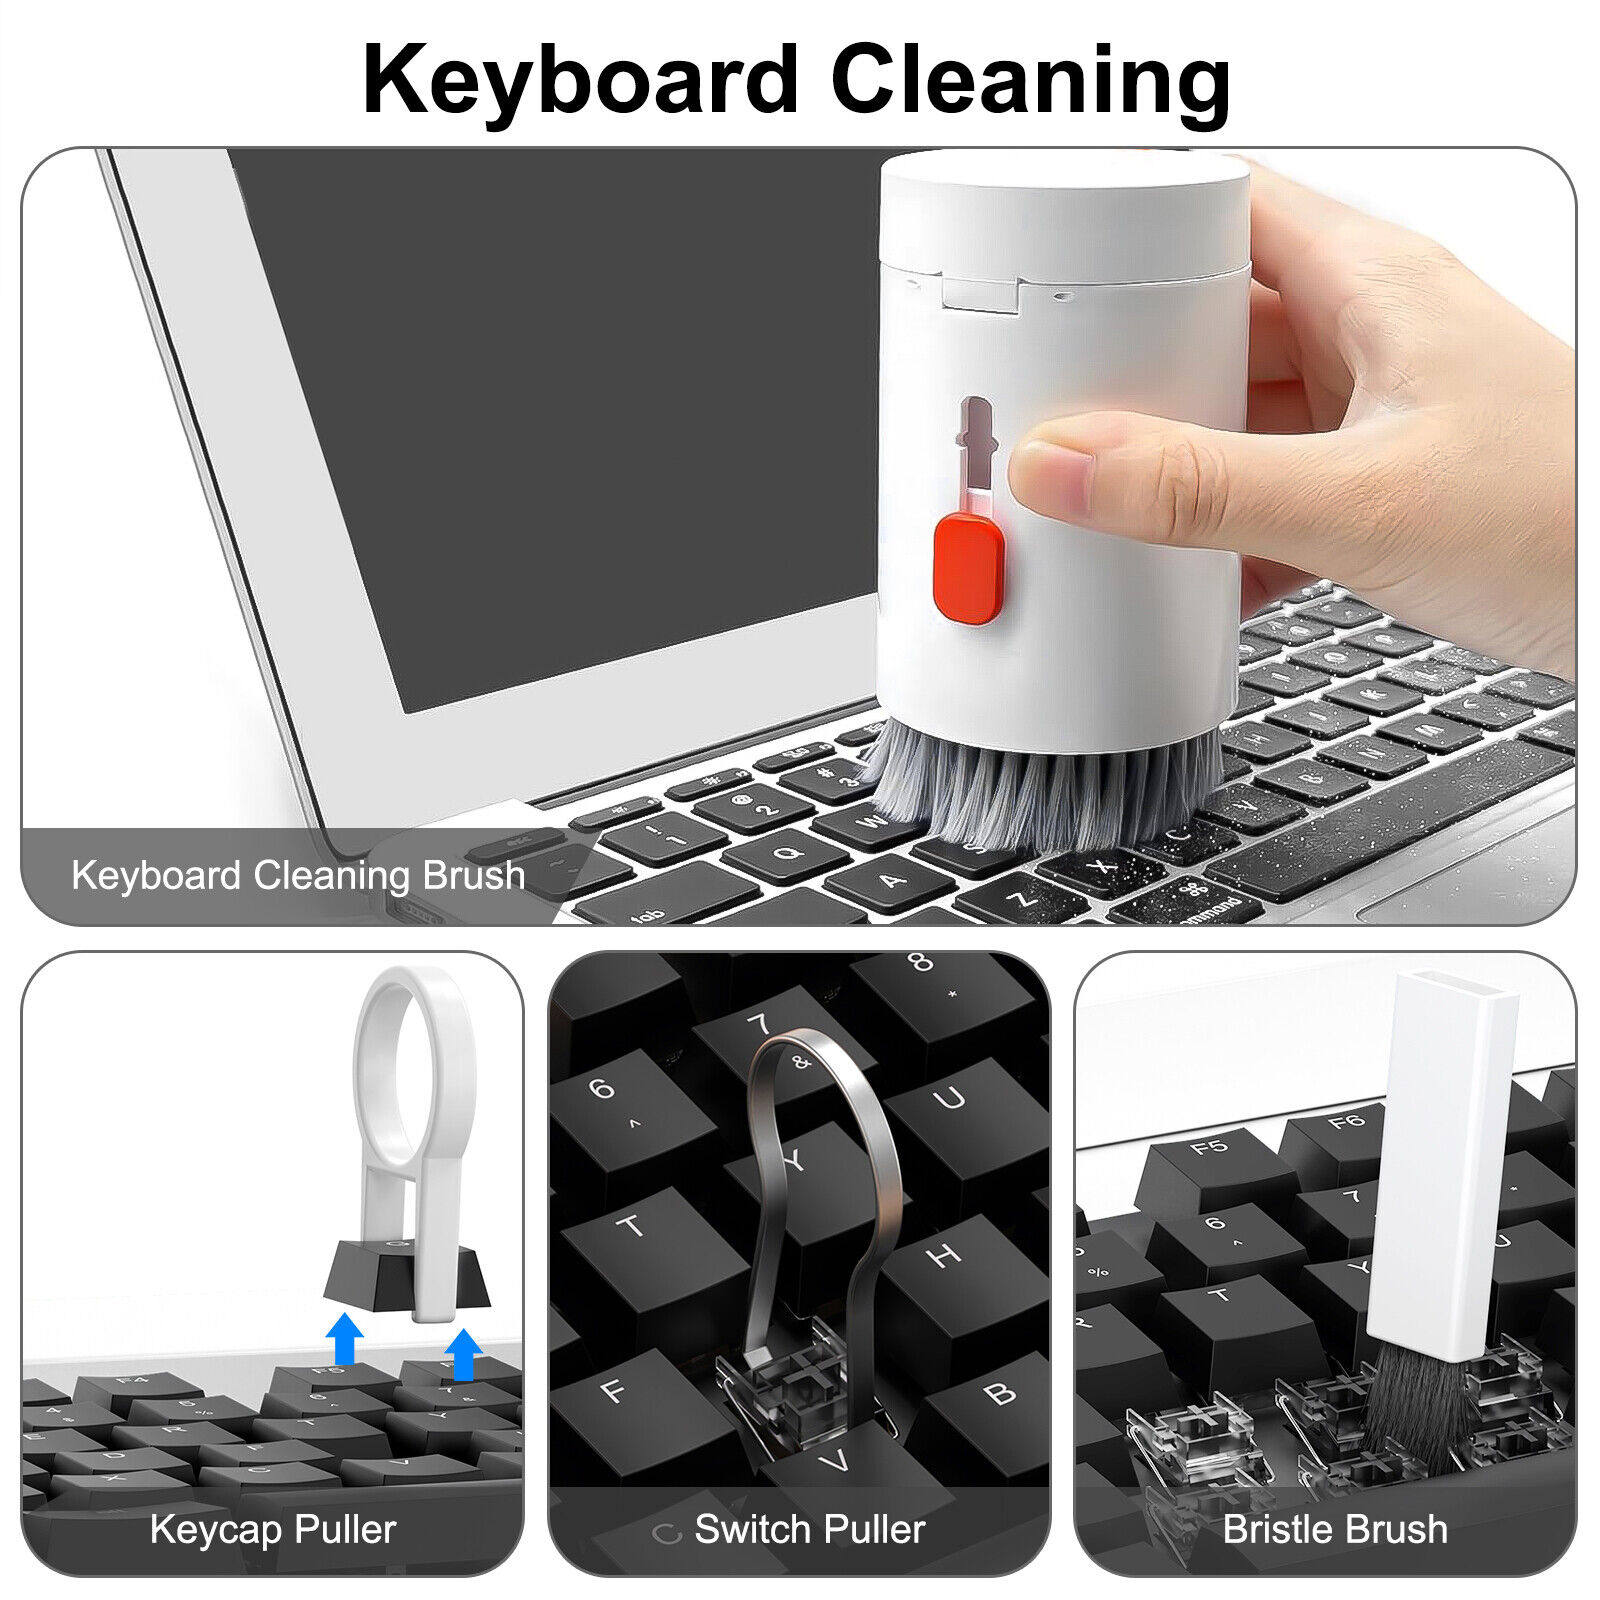 20-in-1 Laptop Keyboard Cleaner Kit Electronic Device Clean Tool Set